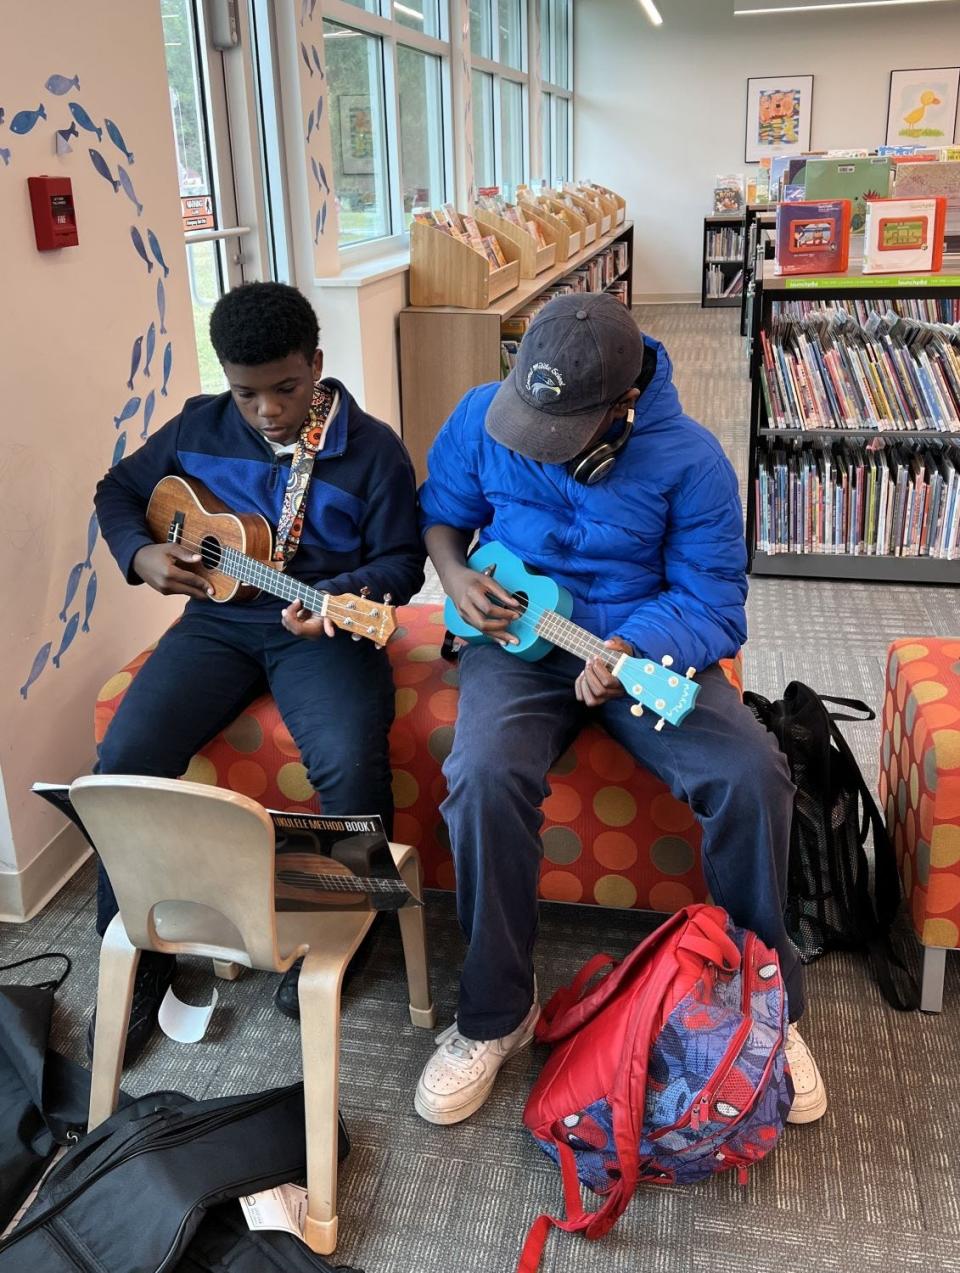 Two students check out ukuleles for an informal afternoon of playing music together at Southwest Chatham Library.